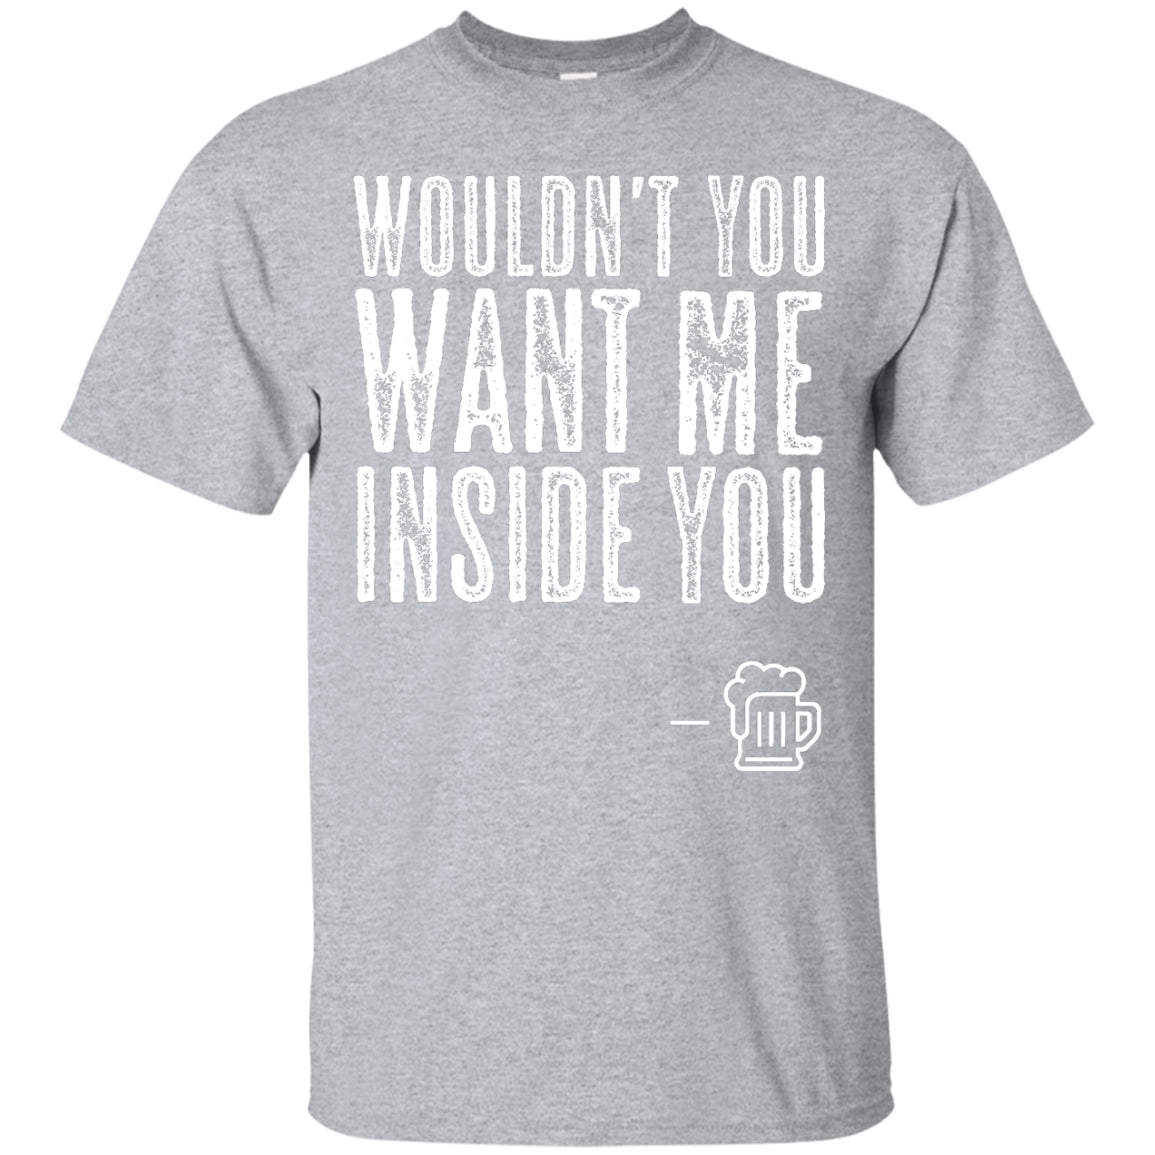 Wouldn't You Want Me Inside You? T-Shirt Apparel - The Beer Lodge